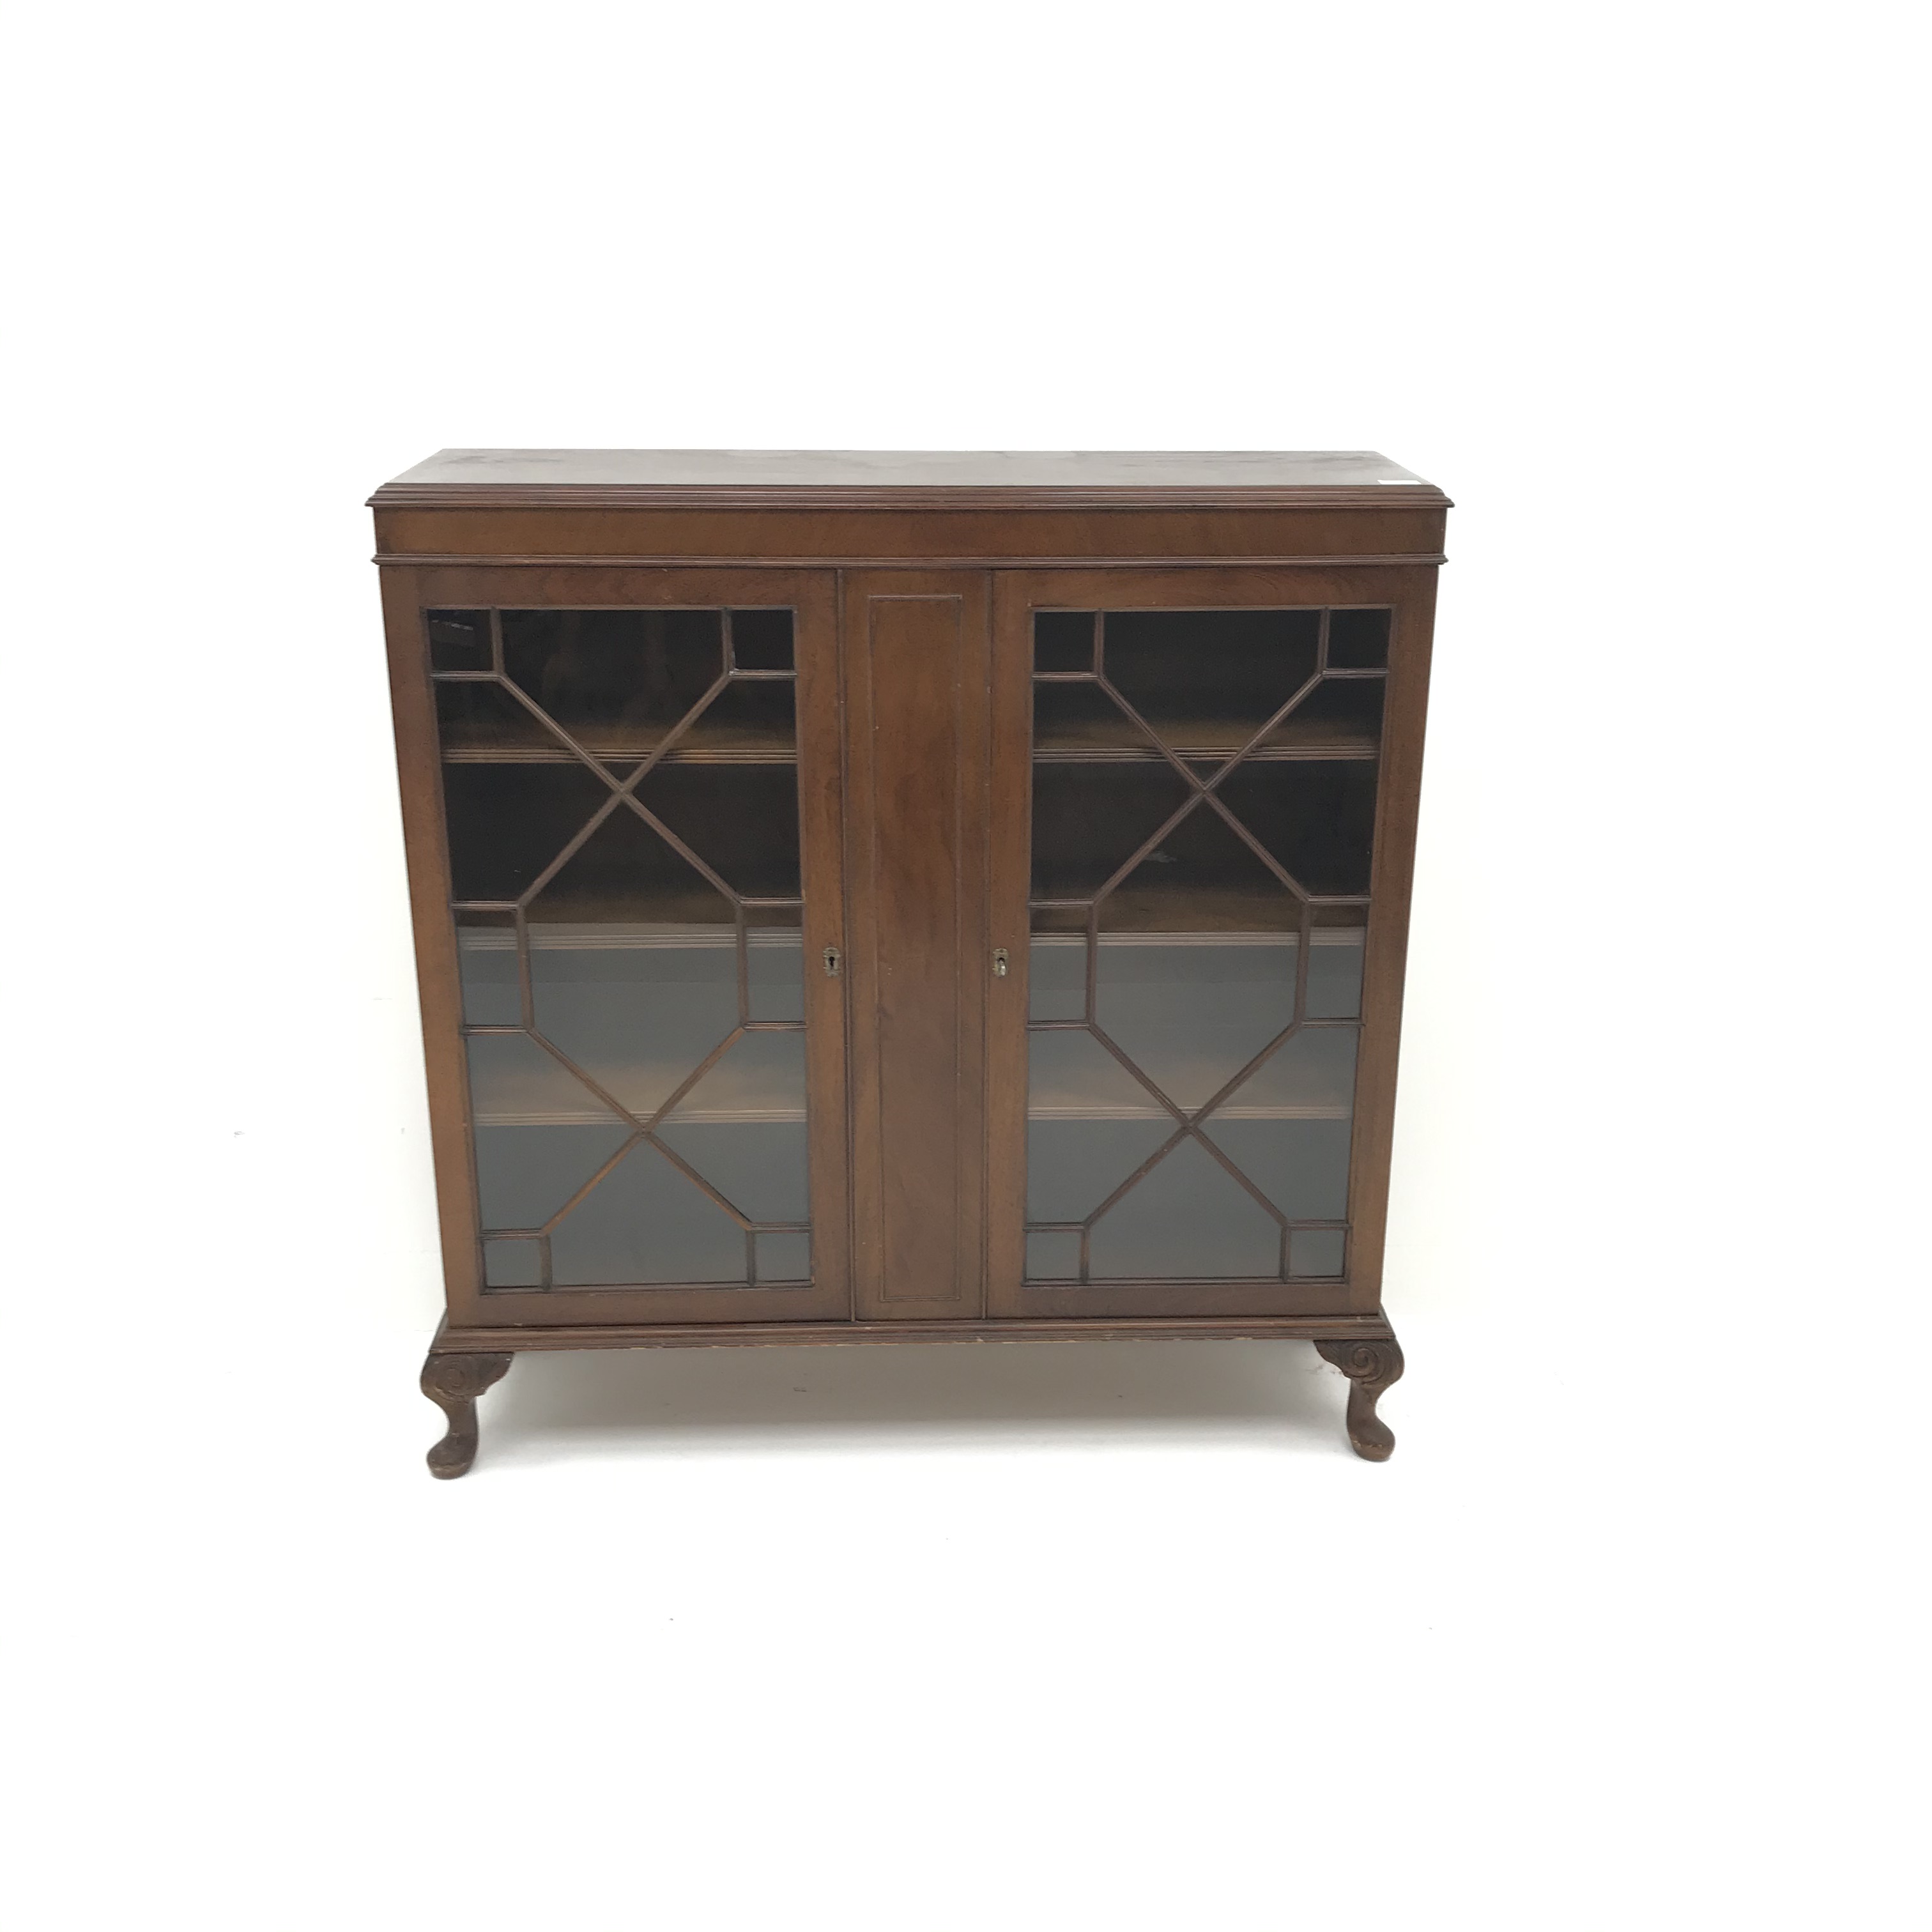 George lll style mahogany display cabinet, two doors enclosing three shelves, cabriole feet, W110cm, - Image 2 of 2